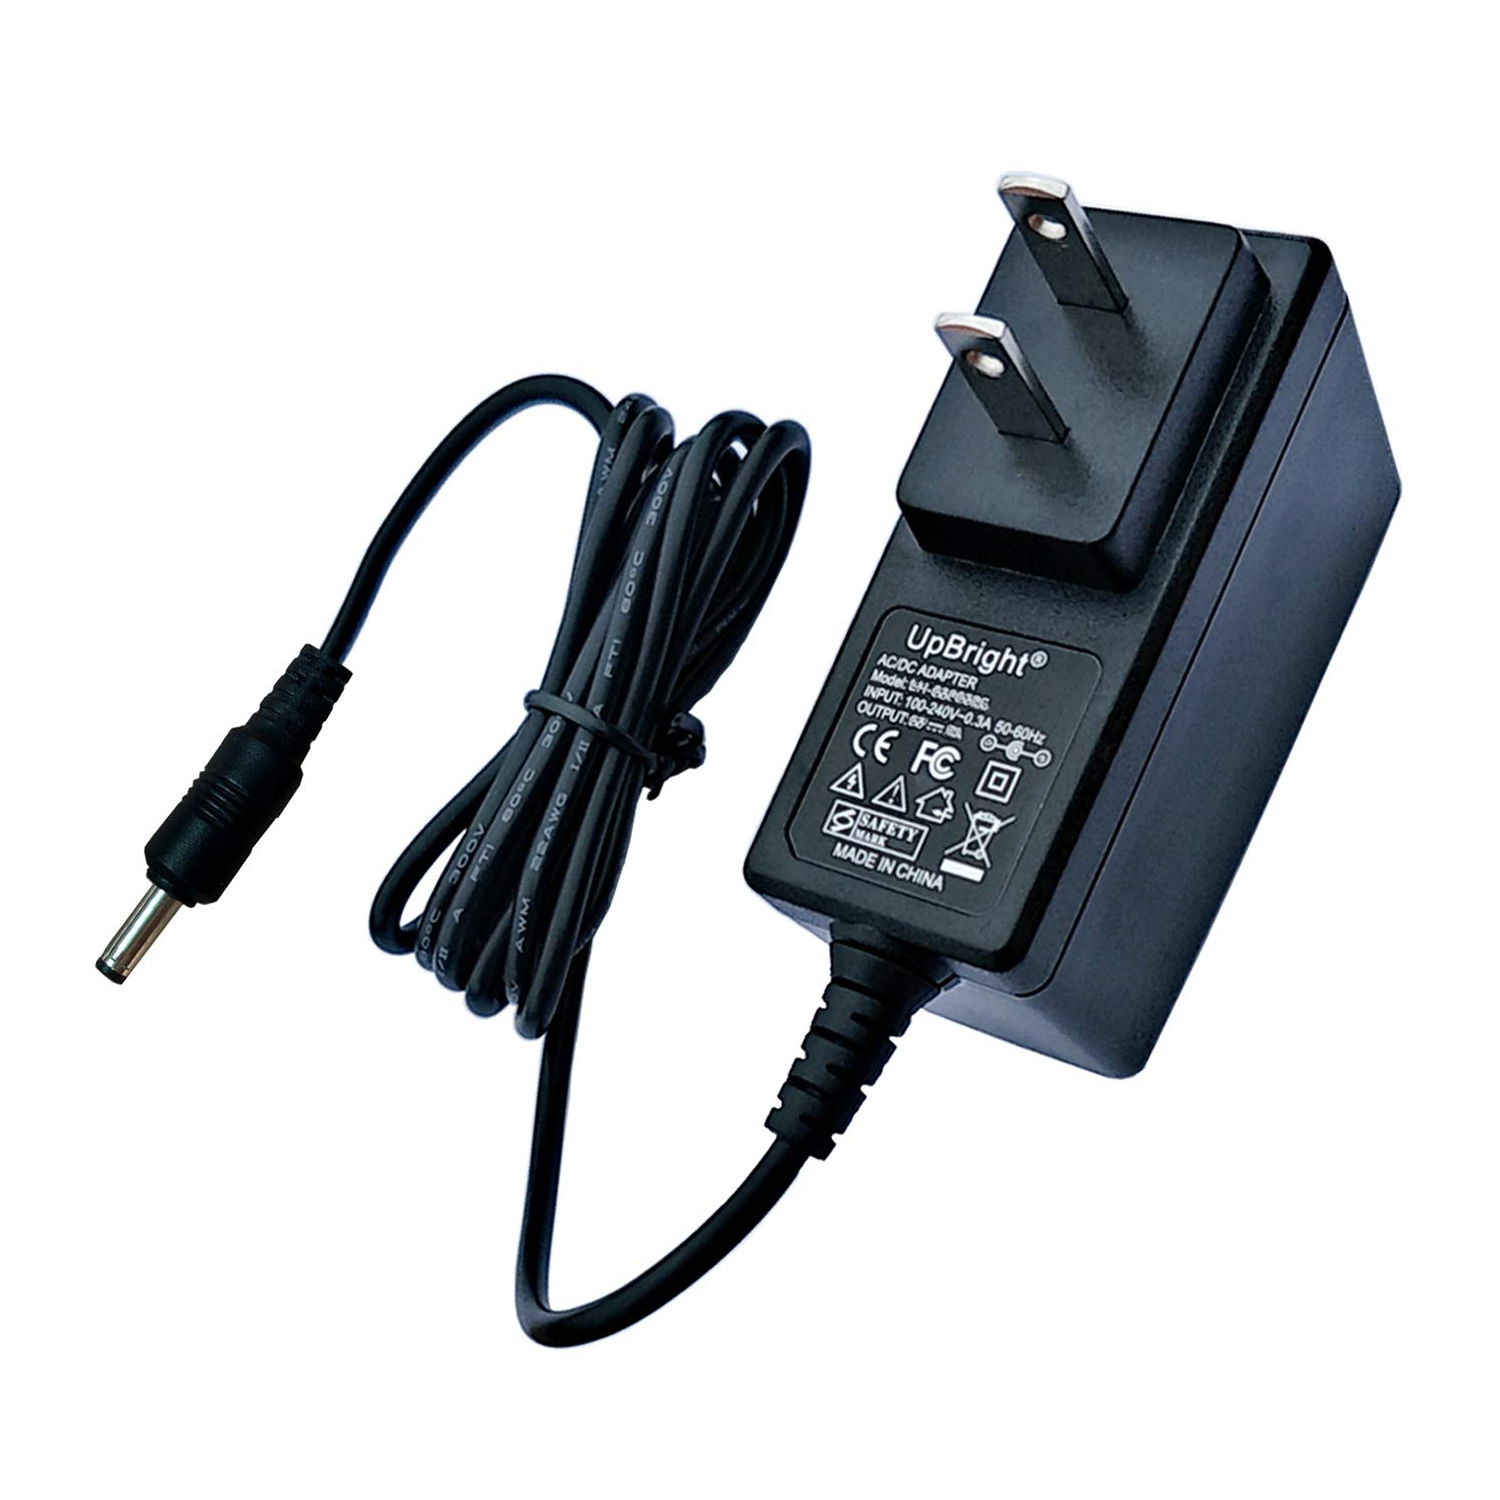 5.9V AC/DC Power Adapter Compatible with Philips AD305 AD305/37 AD305/37B ORD2100C/37 ORD2100B ORD2105 ORD2105B/37 ORD2105C Docking Station Radio OH-1015A0592000U1-UL OH-1015A05920